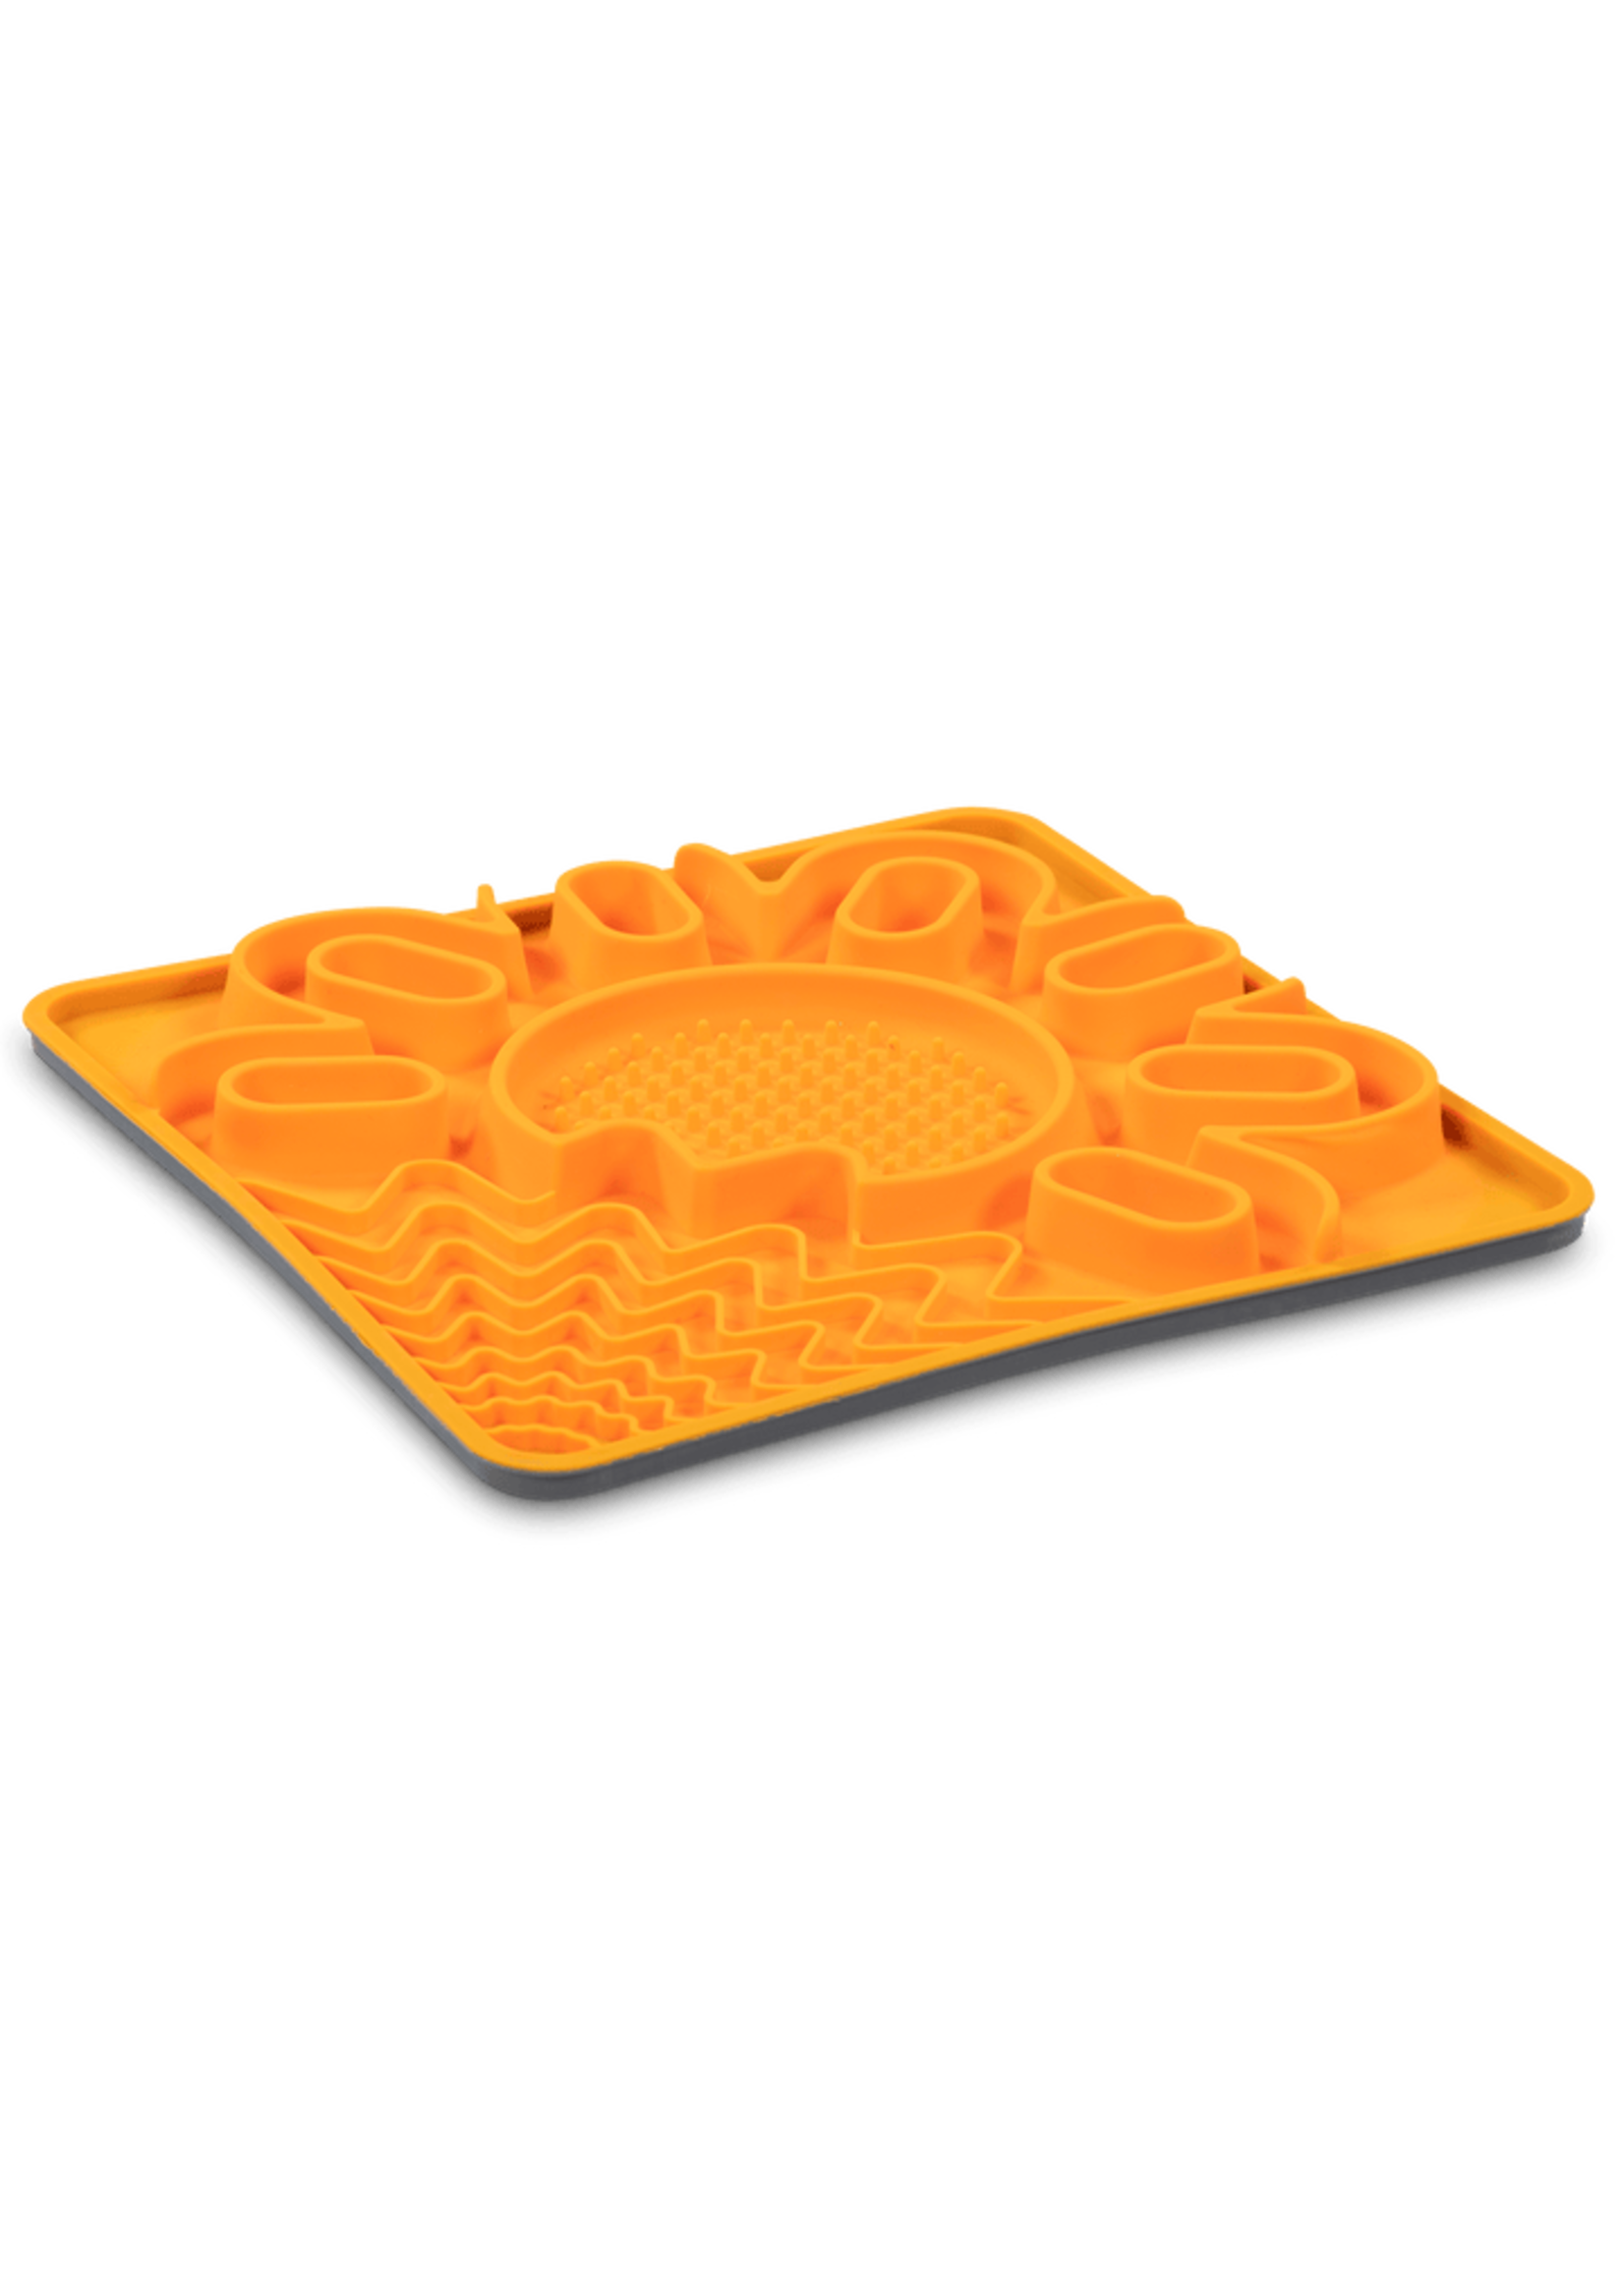 Messy Mutts Messy Mutts Framed Silicone Interactive Licking Bowl Mat